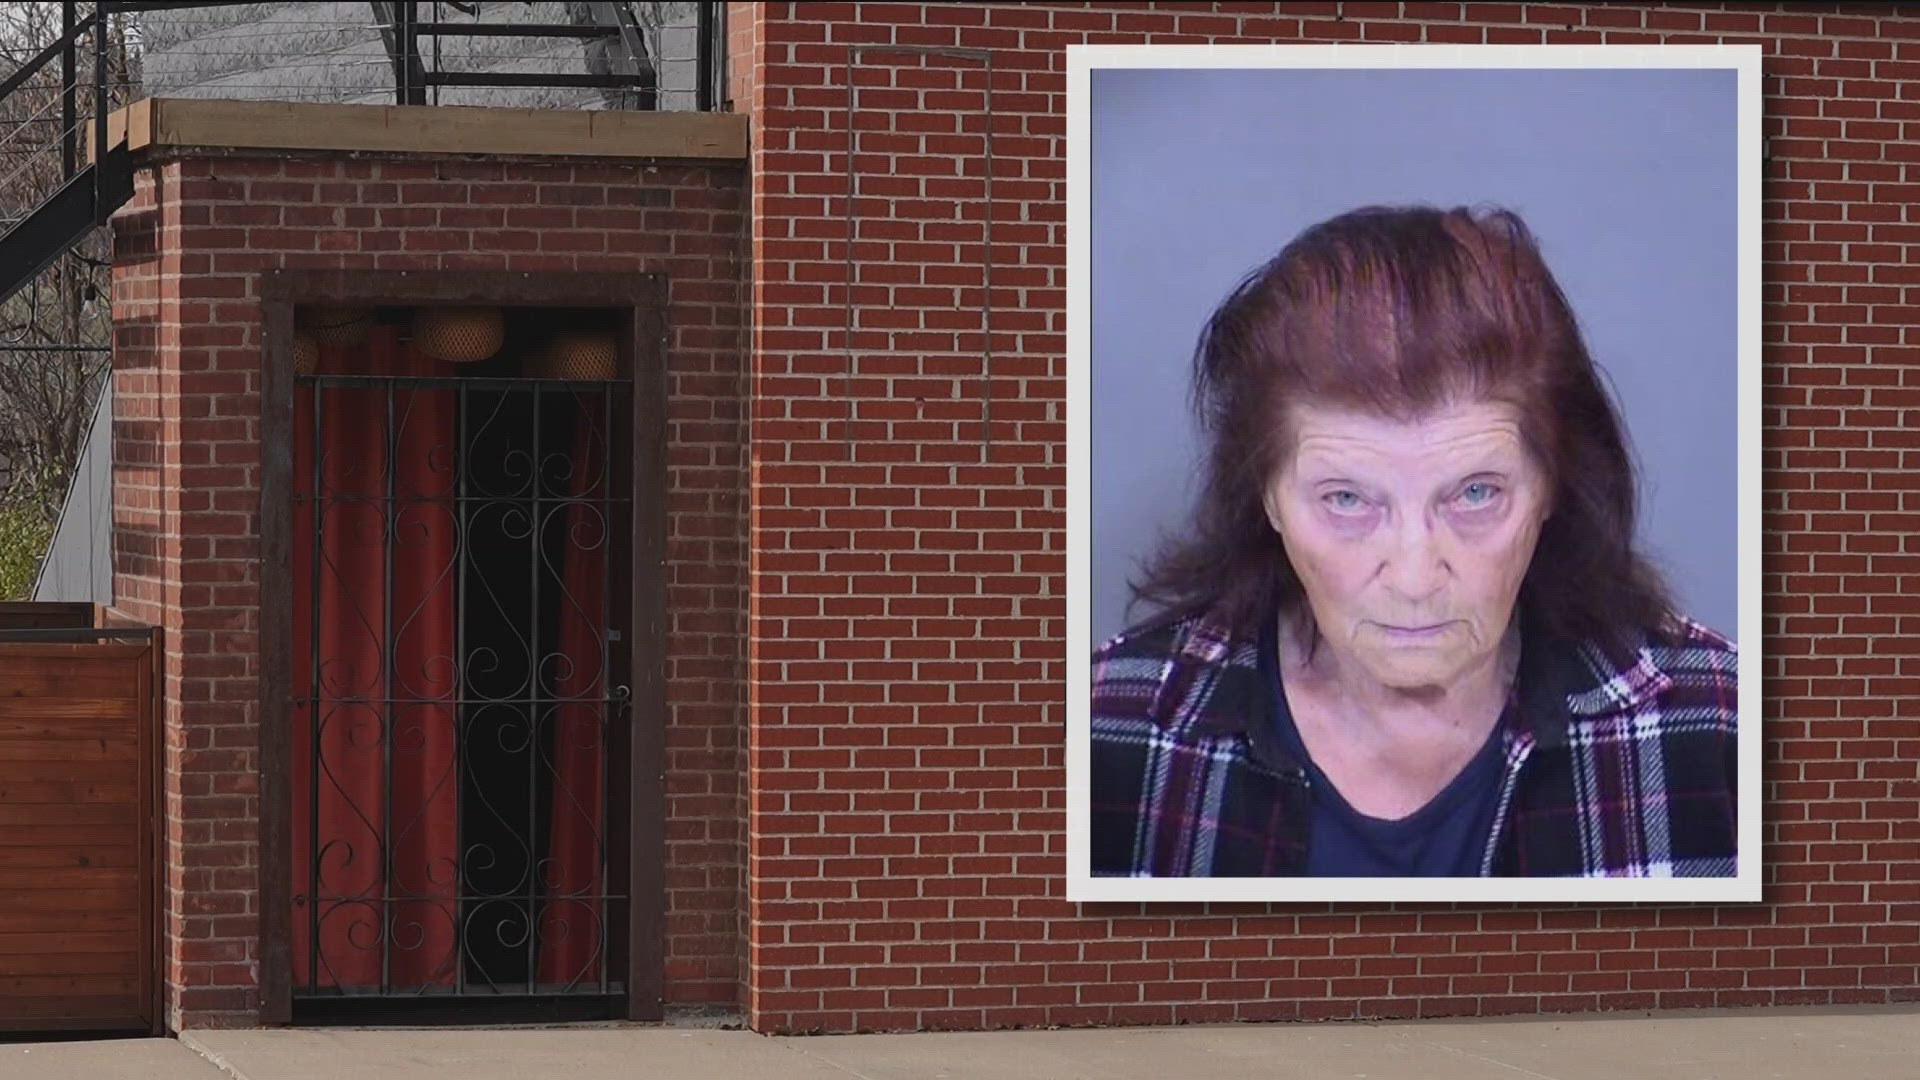 Prosecutors said Mary Jo Bailey shot and killed Yvonne Menke in an apartment complex stairwell back in 1985 out of jealousy stemming from a love triangle.